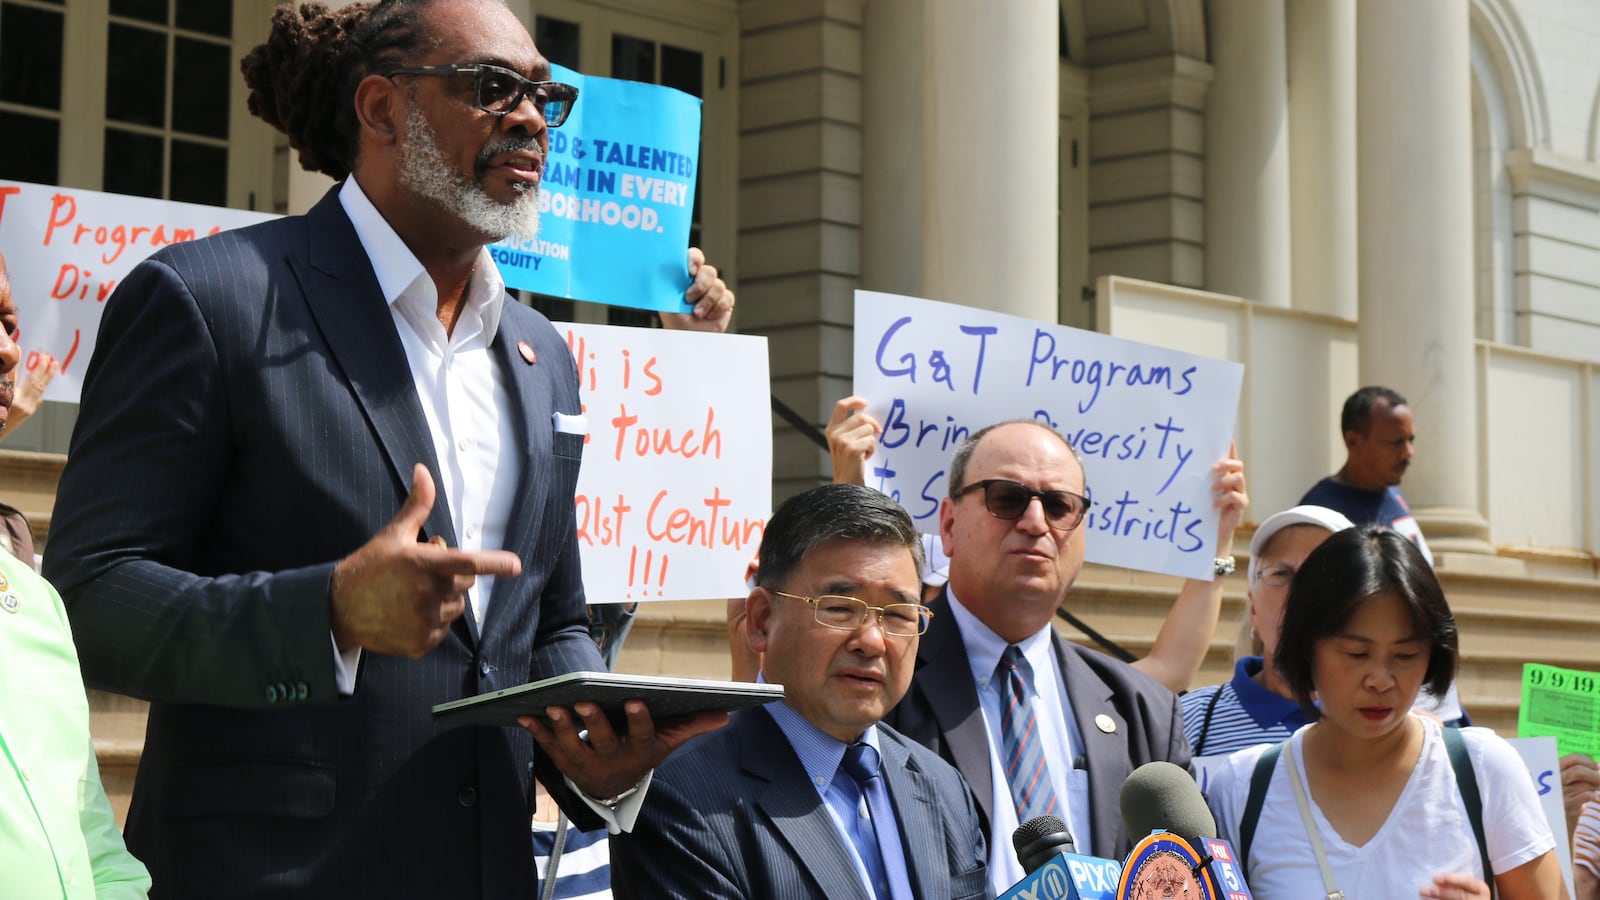 Robert Cornegy, left, and other New York City Council members called for the preservation of gifted programs.